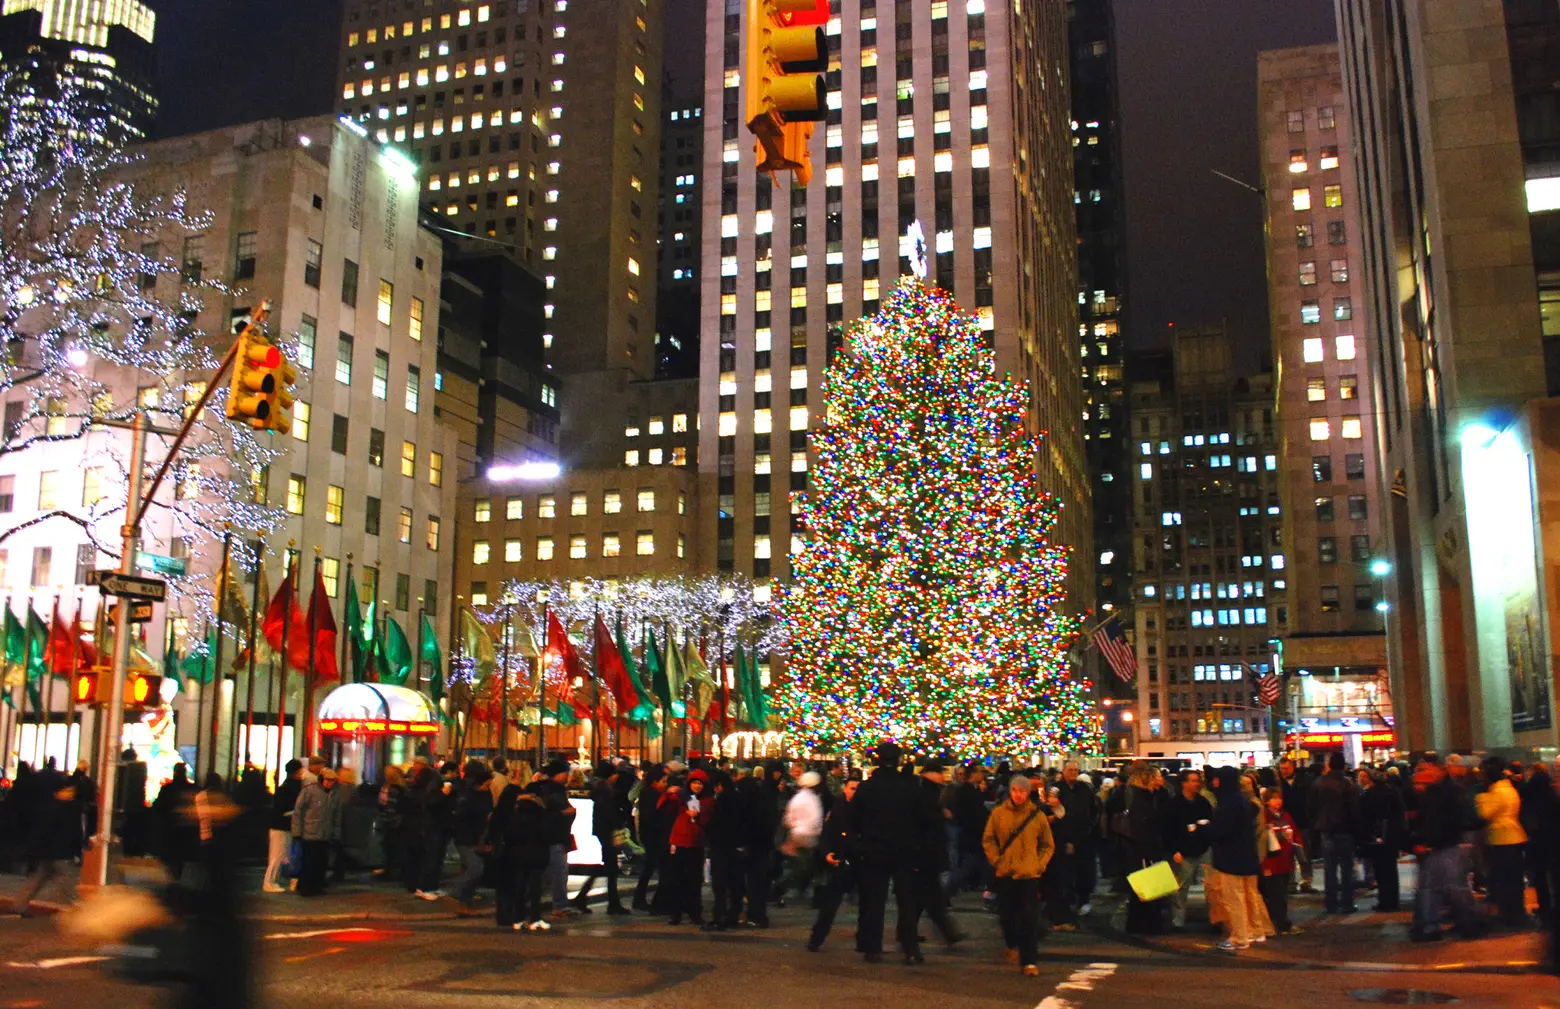 How to get around Midtown during tomorrow’s Rockefeller Center Christmas Tree lighting